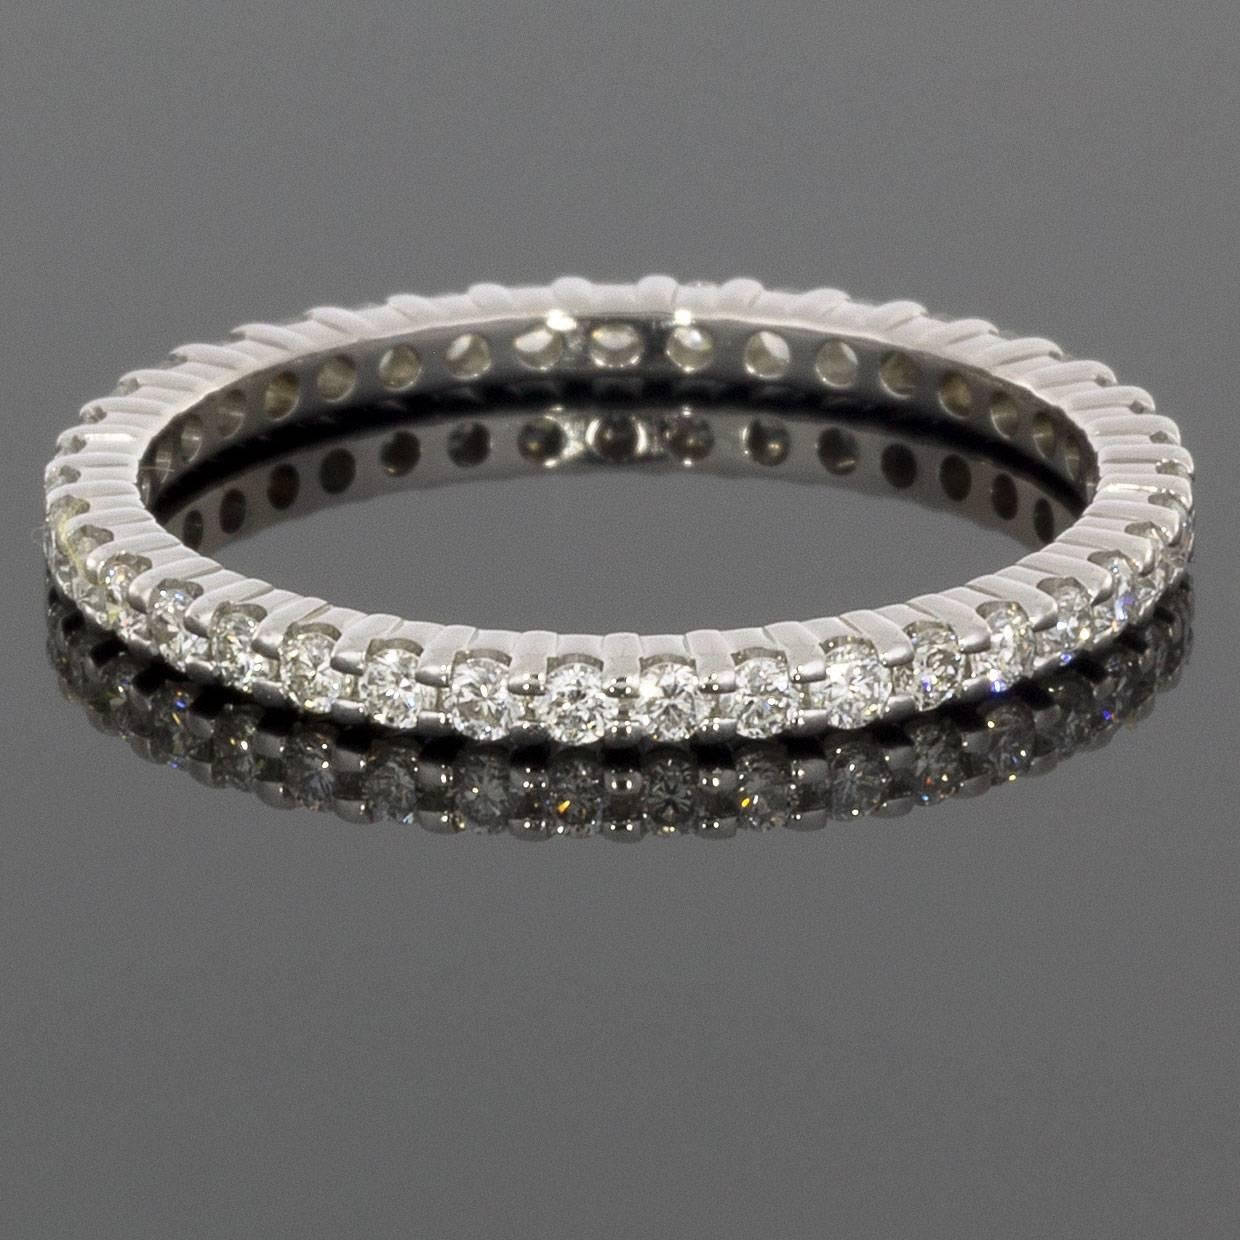 This classic band is a beautiful 14 karat white gold diamond eternity band that can dress up any ring. It can be used as a wedding band, stand alone band, or stack ring. The ring has round brilliant cut diamonds that have a combined total weight of